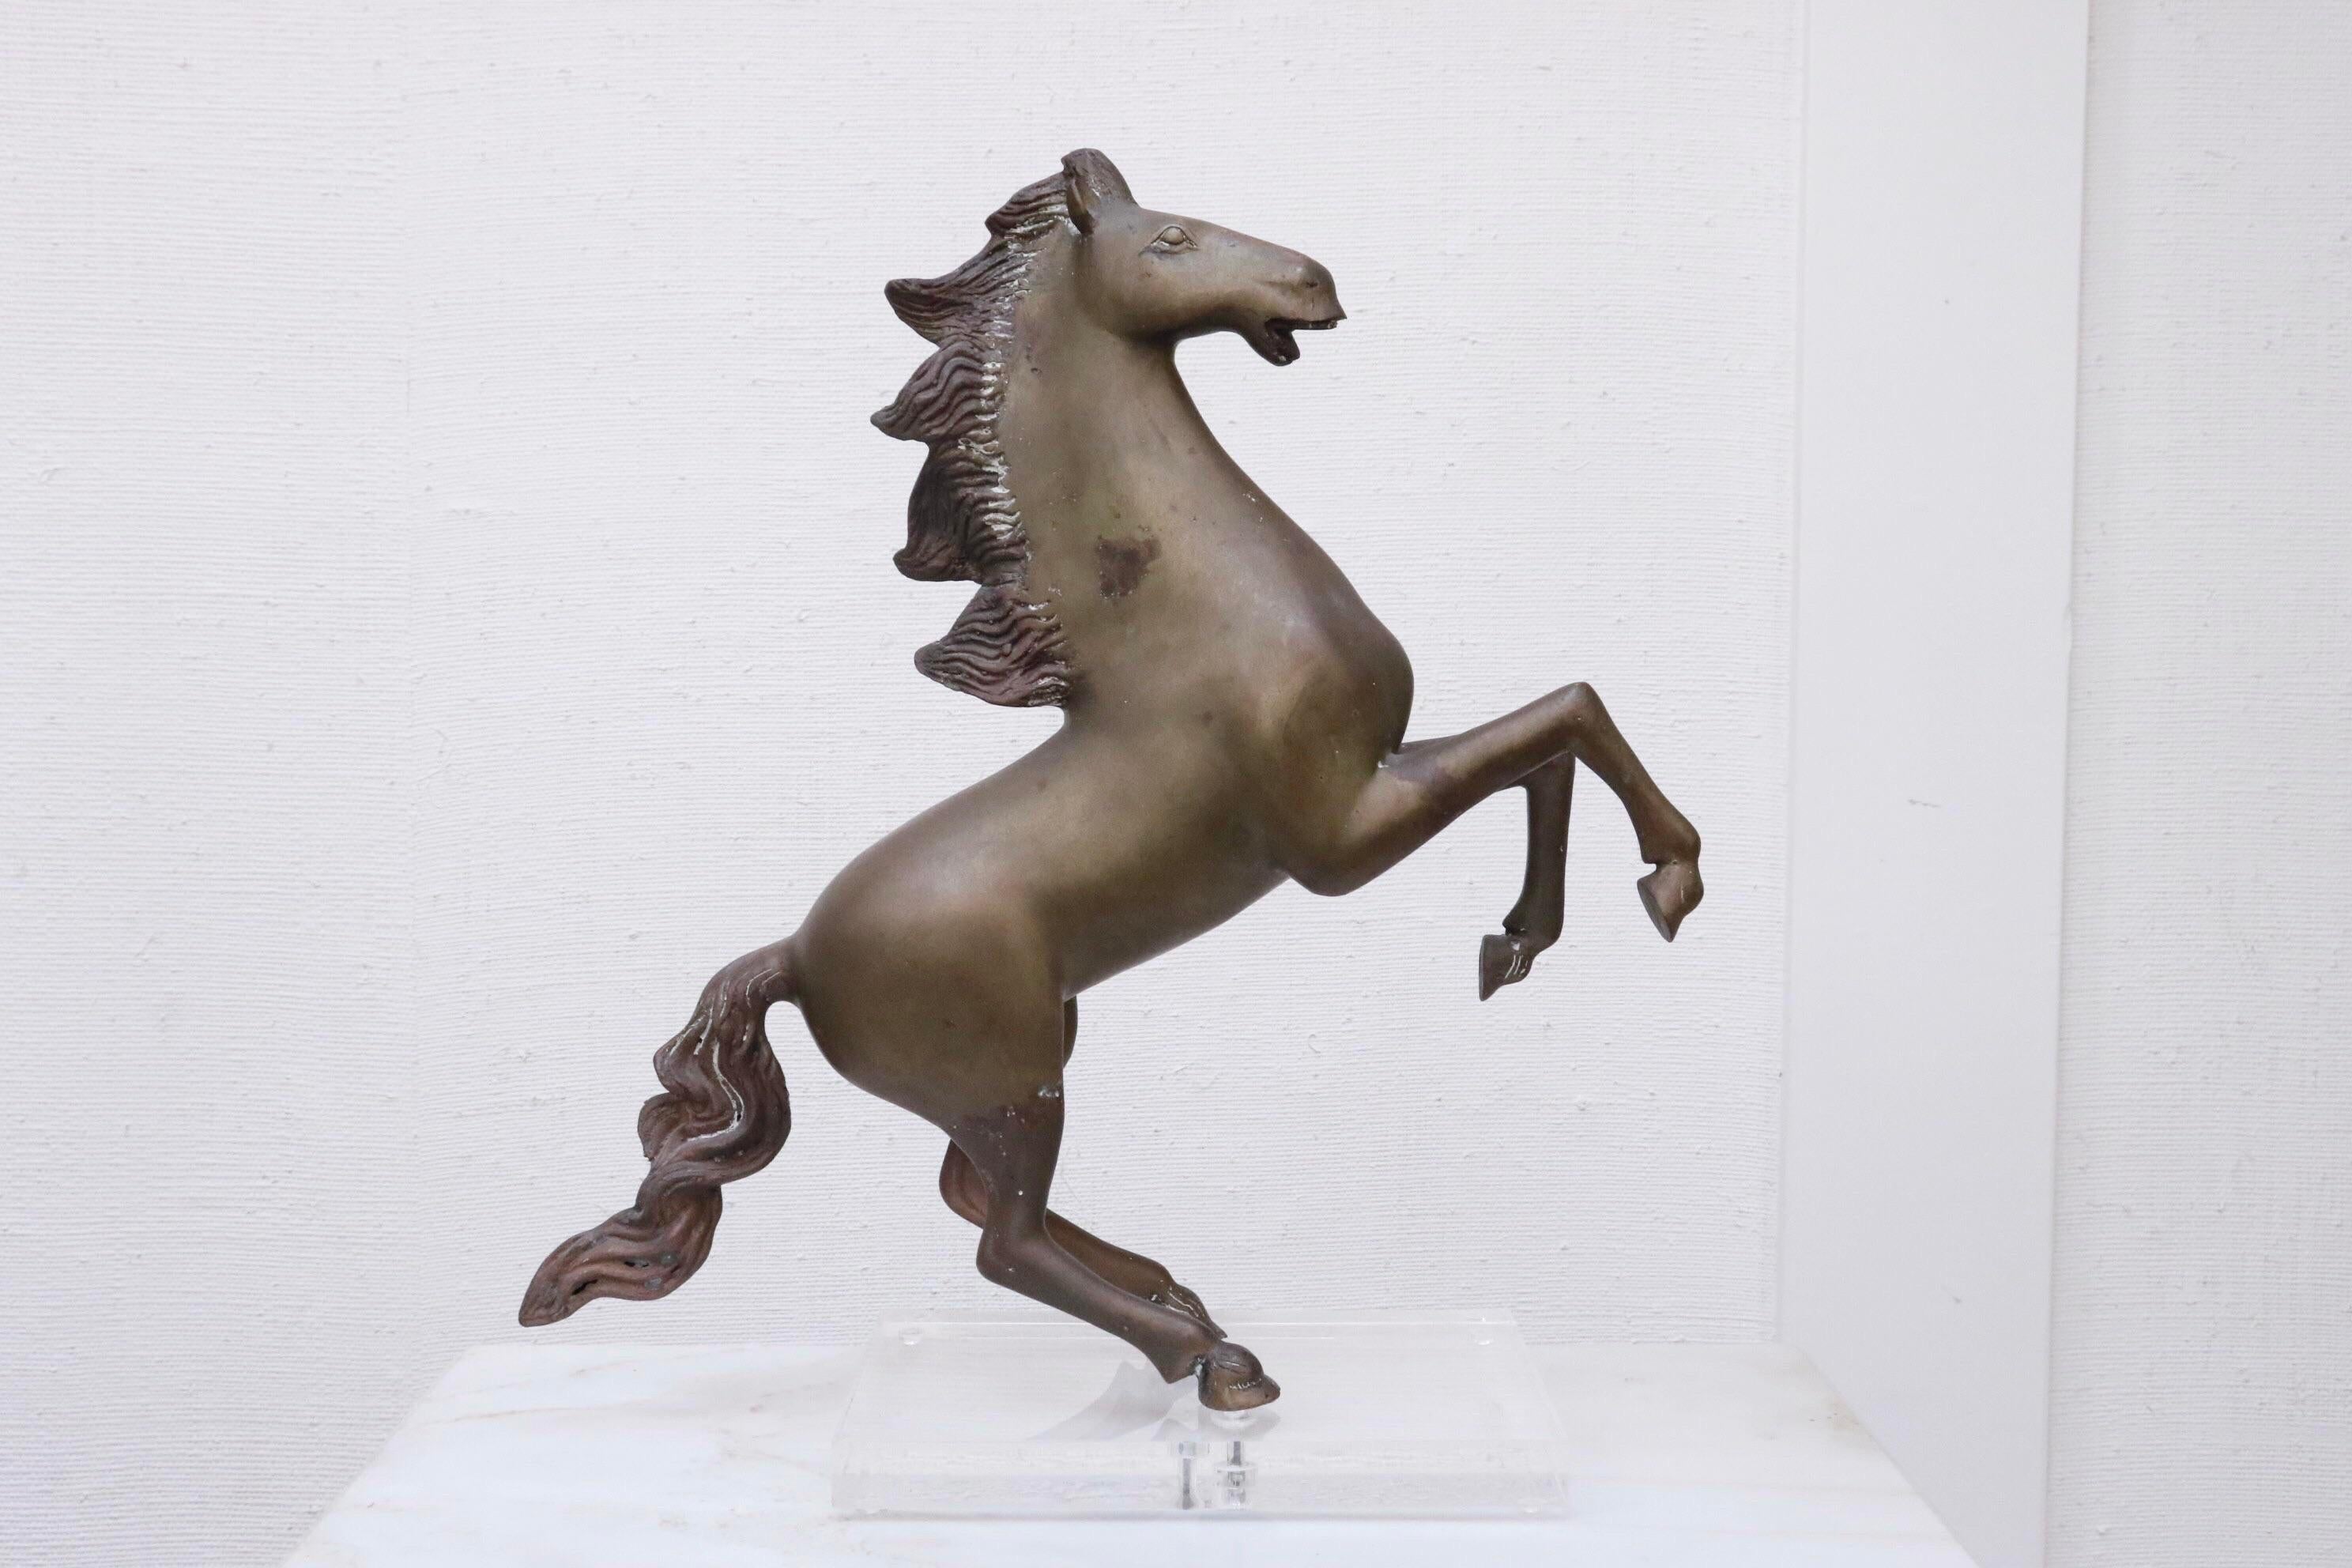 A rearing horse sculpture in solid brass. Cast with so much movement - you can see the wind in his mane and tail! The brass has just a hint of patina. Stands on a rectangular lucite base.